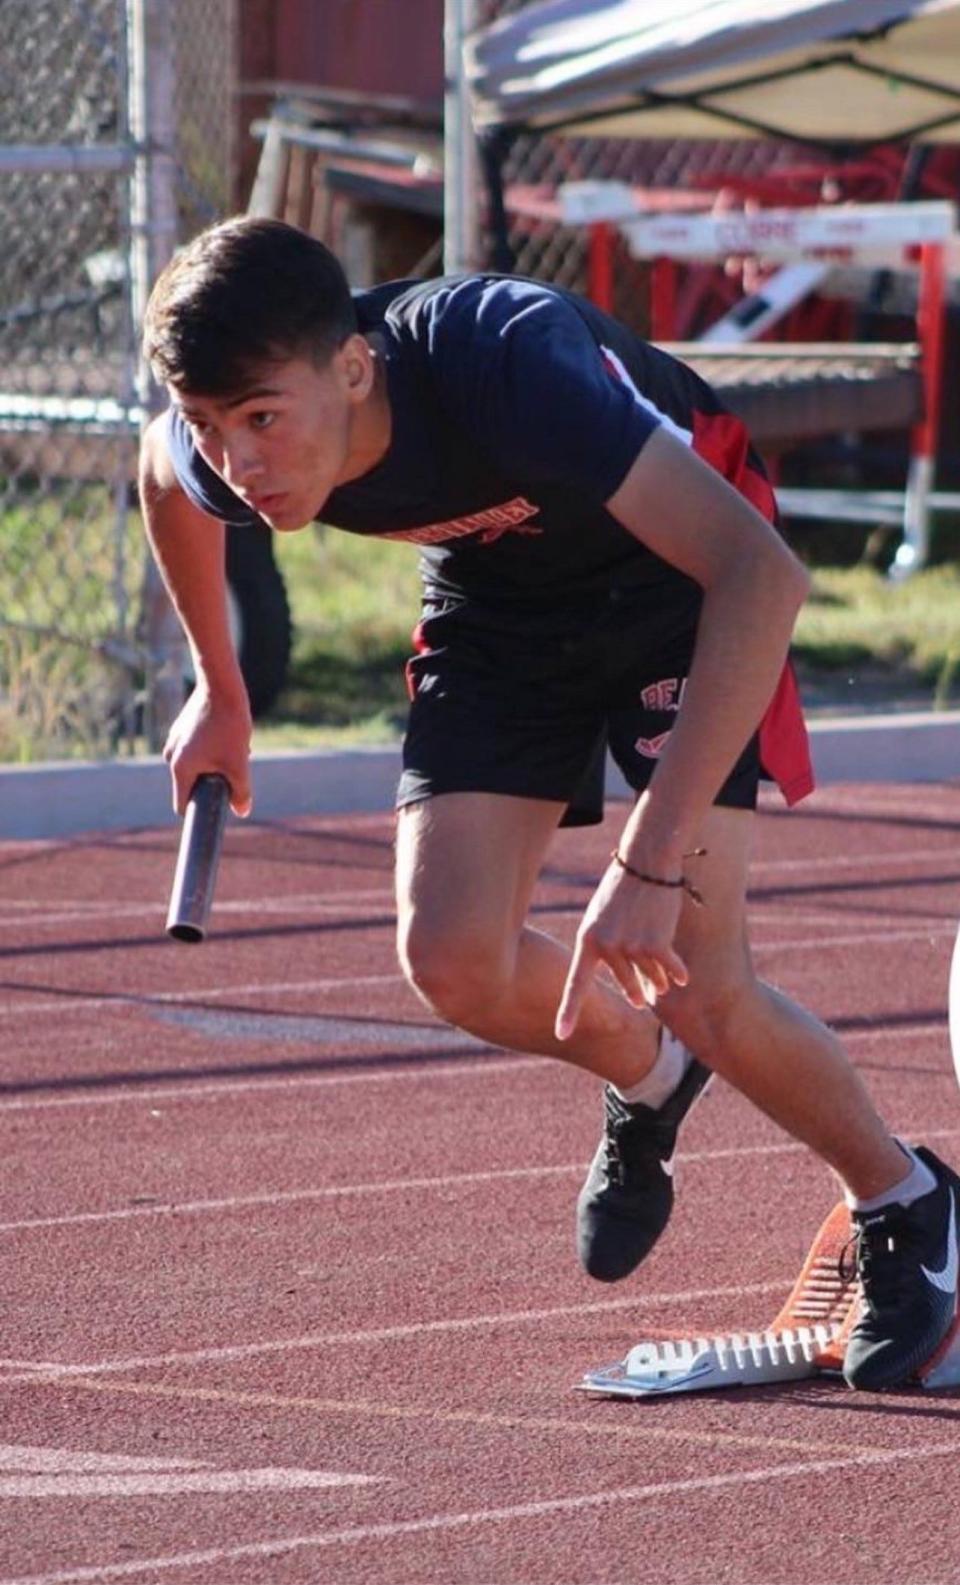 Joaquin Olvera, senior at Hatch Valley High School, is bound for Kansas on a track scholarship at Dodge City Community College. He wants to continue running and study business while at school.